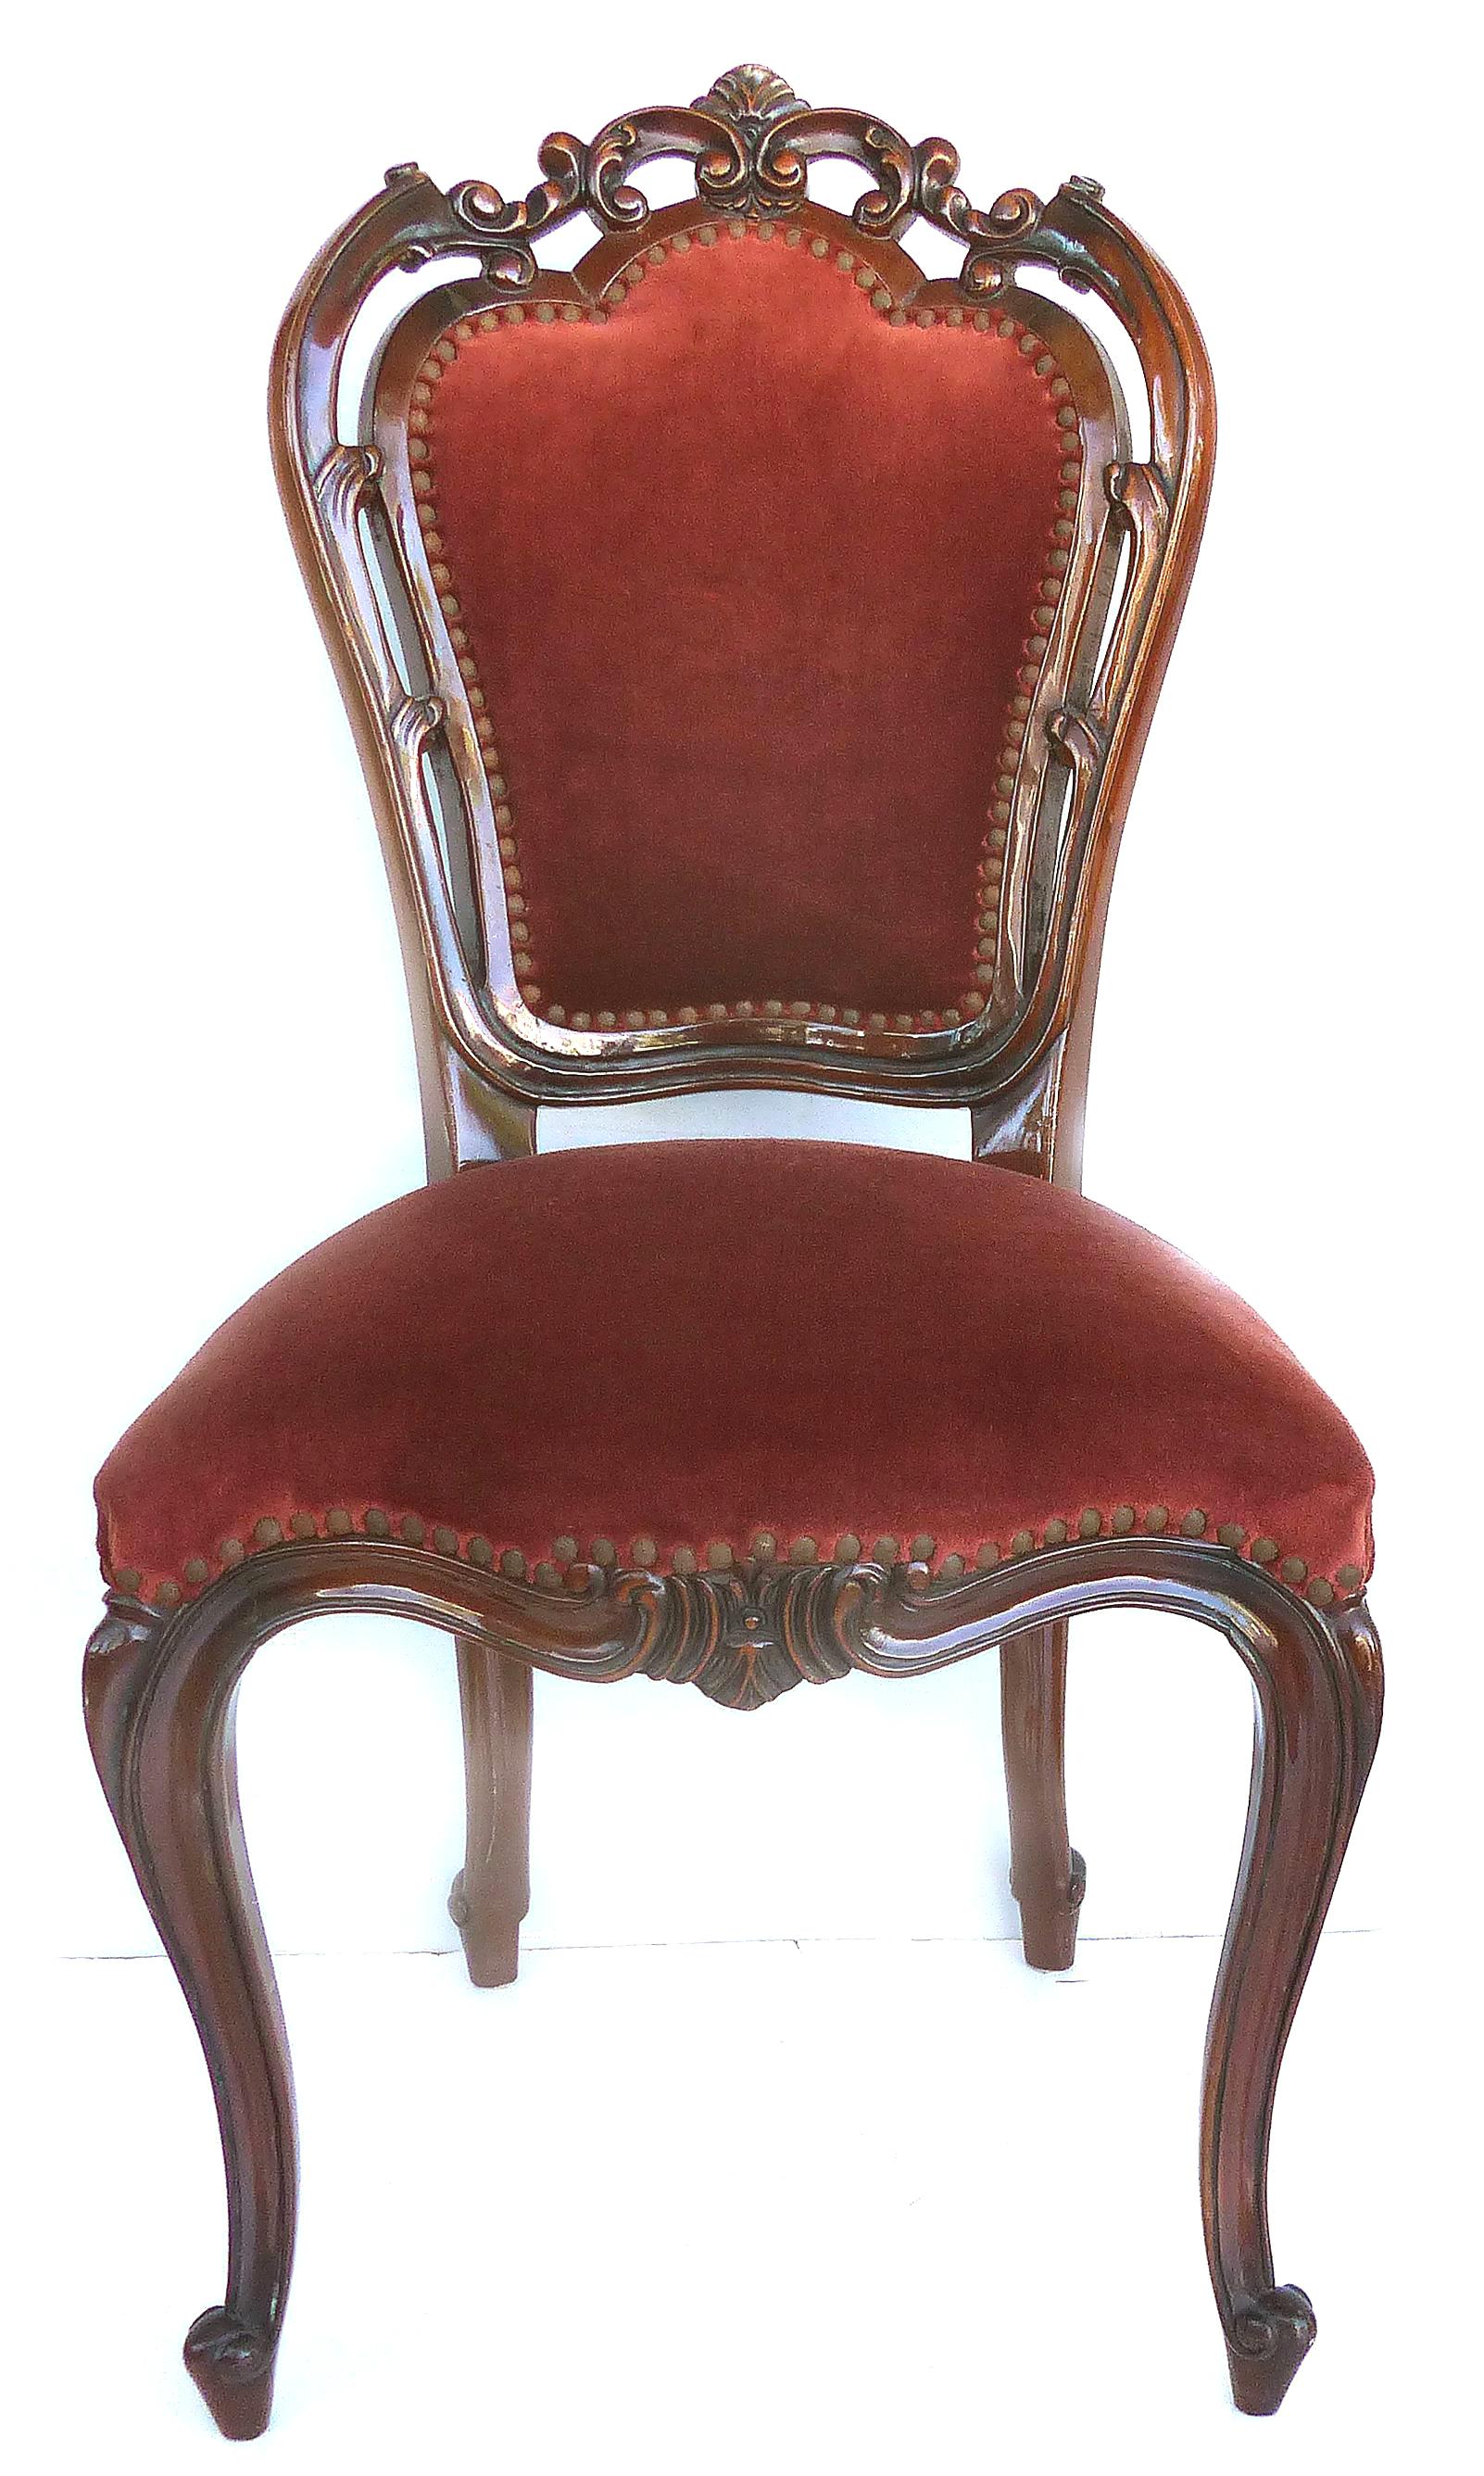 
Louis XV Style Mahogany Dining Chairs with Carved Pierced Backs, Set of Six

Offered for sale is a set of six Louis XV style mahogany dining side chairs with pierced open carved backs, velvet mohair upholstery and nail-head tacks. The chairs are in